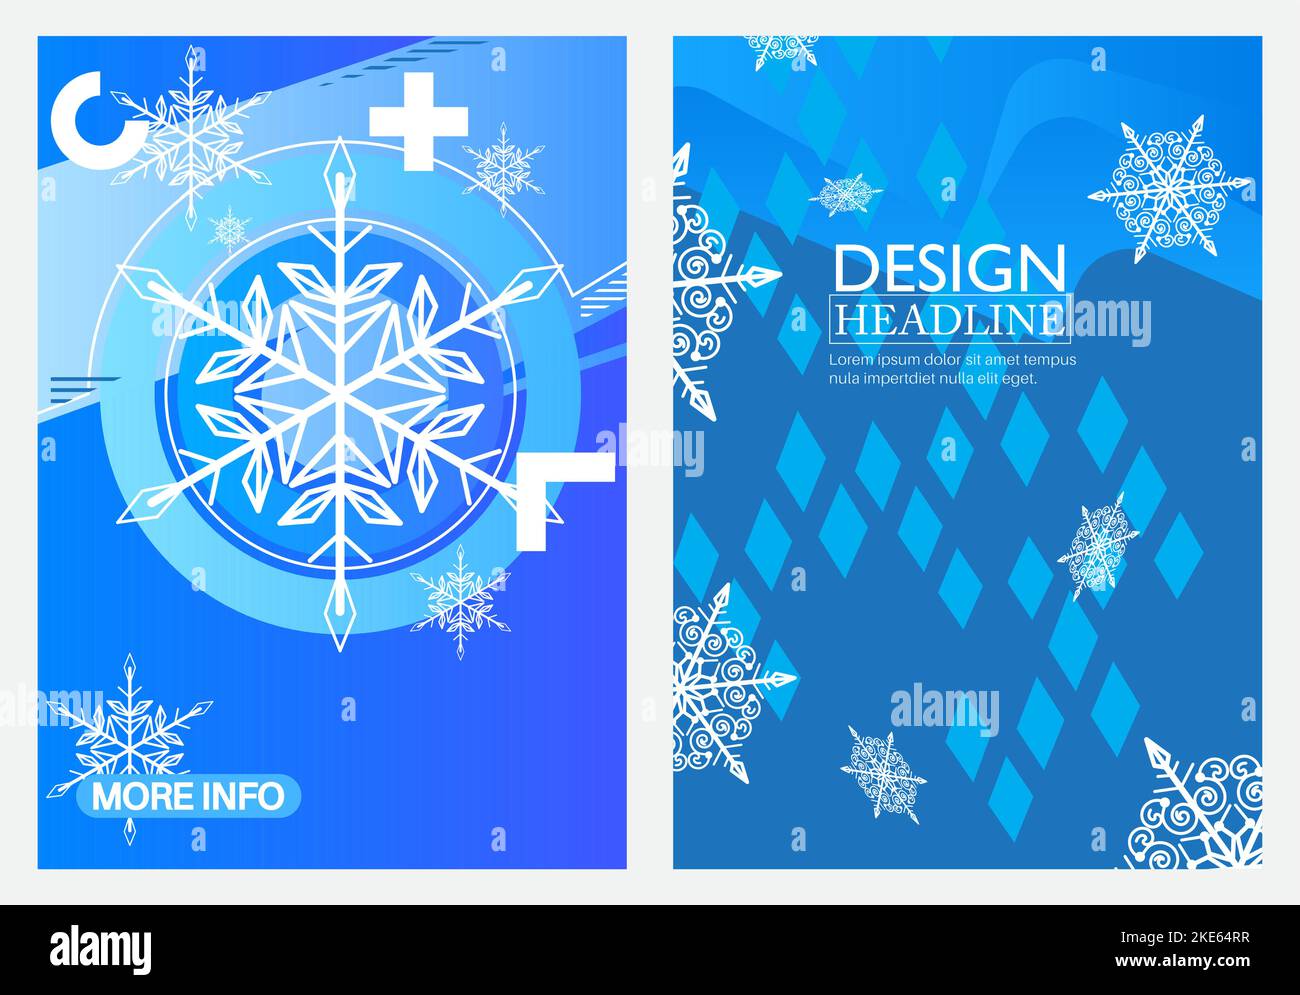 Snowflake template design. Special deal, Christmas season offer poster. Winter Vector illustration. Holiday Clearance, Discount Banner. Business, Stor Stock Vector